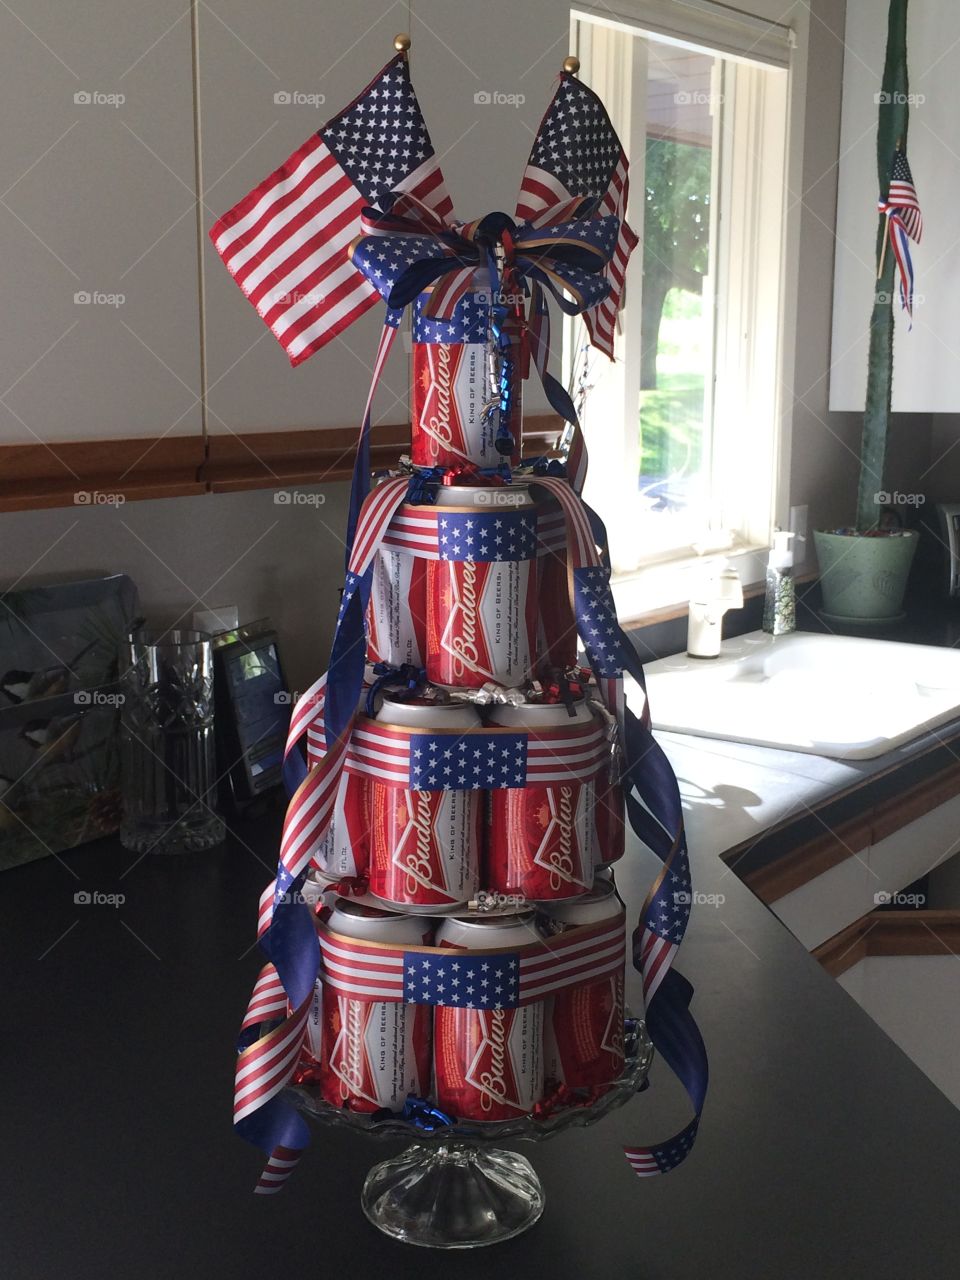 Cake for a soldier's homecoming